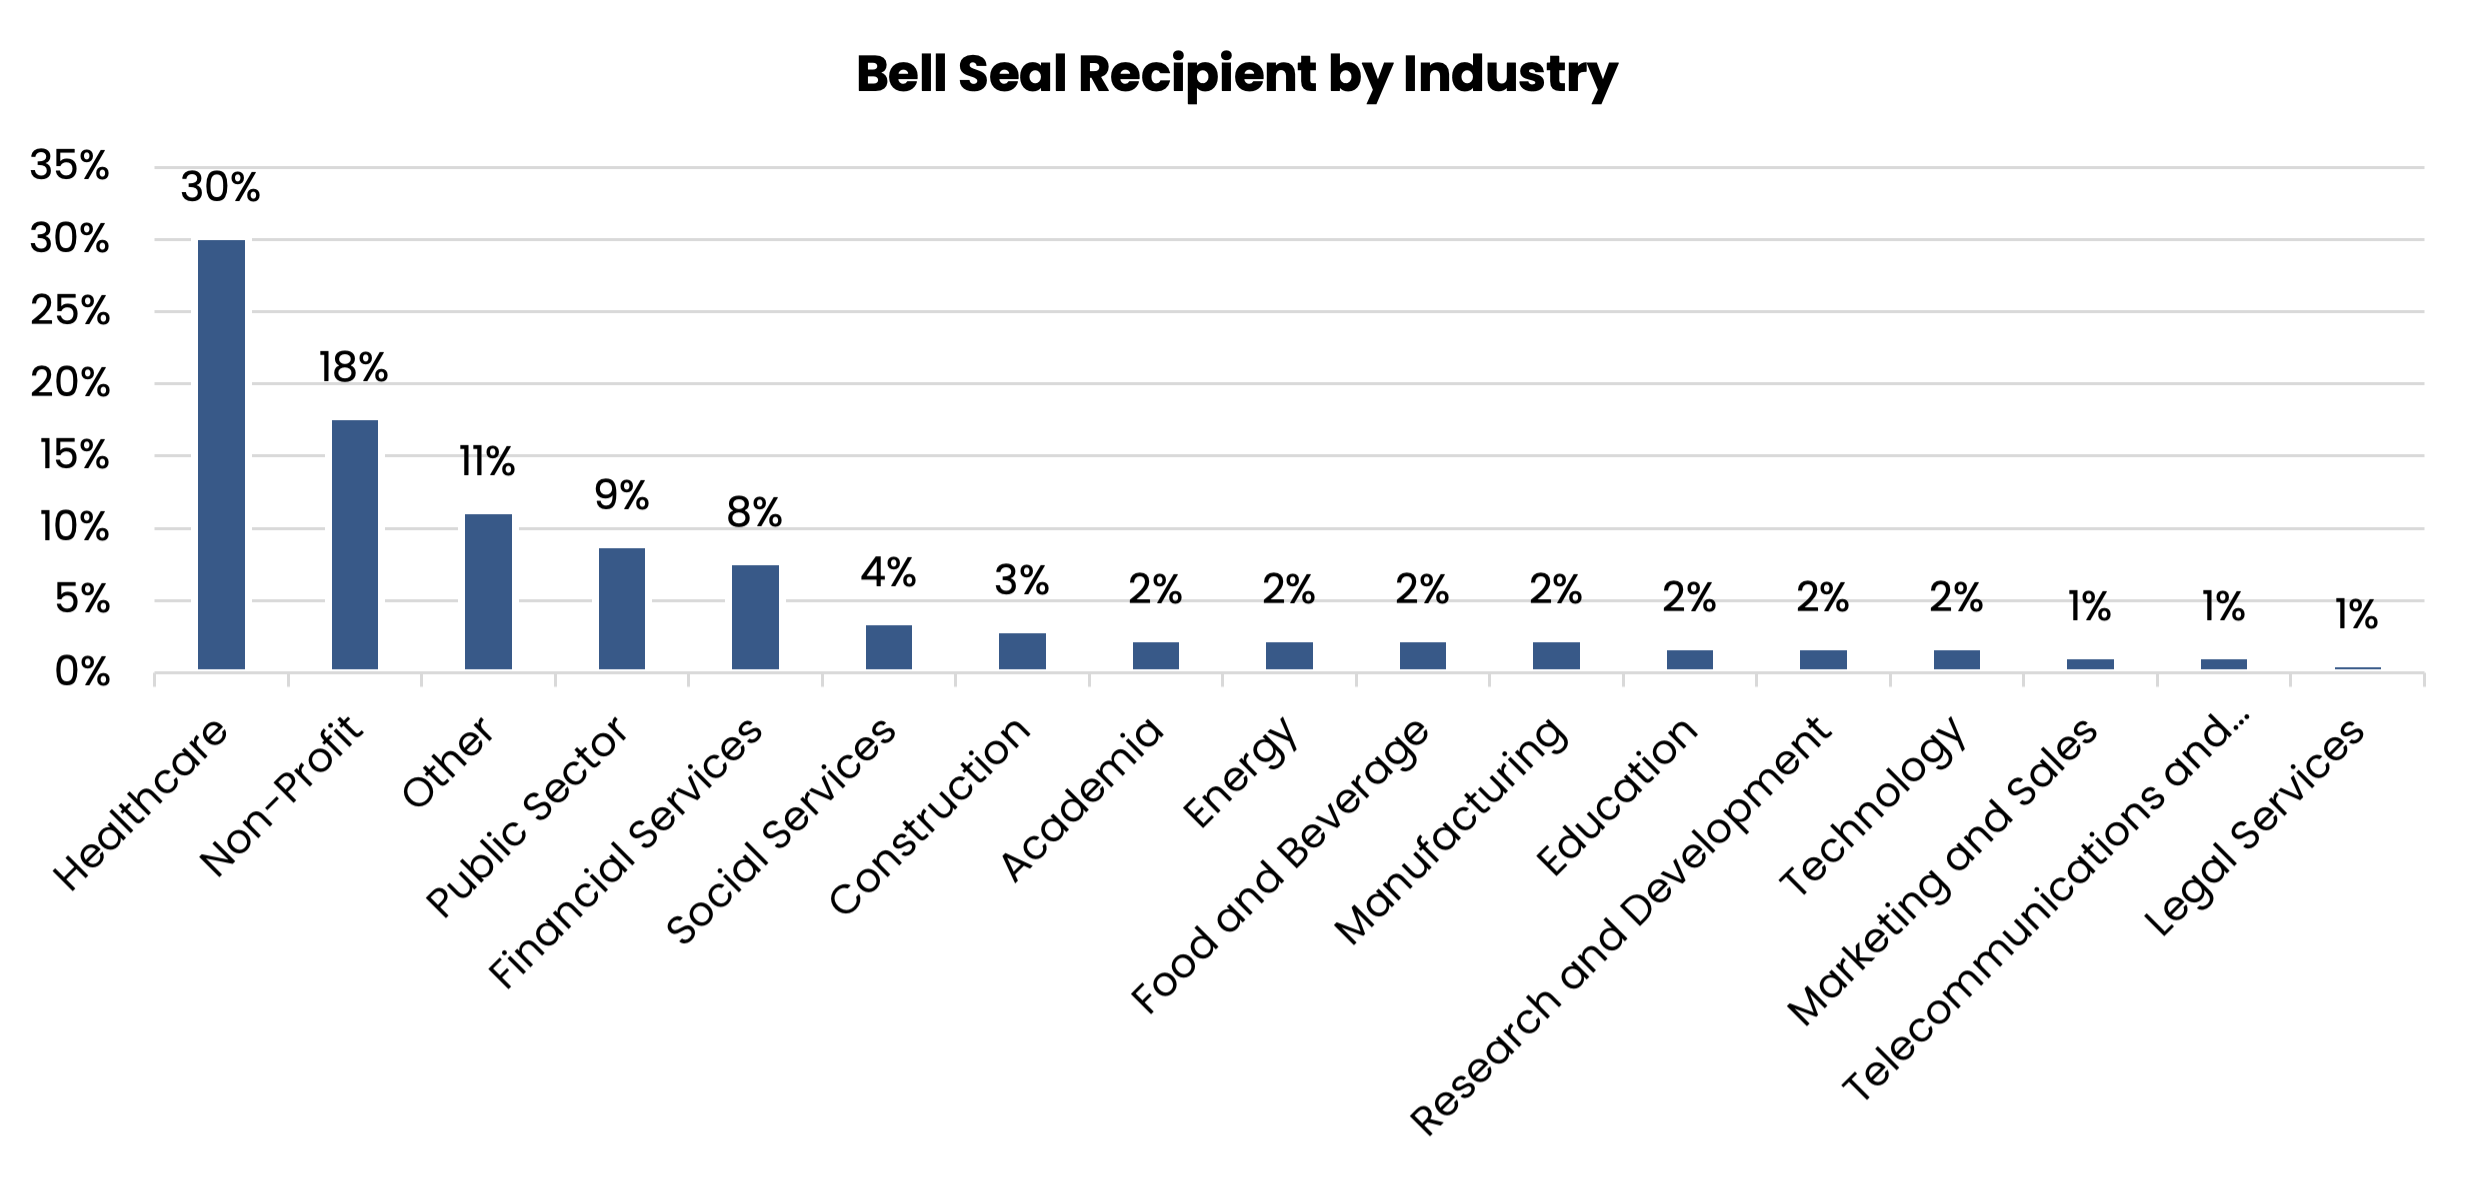 Bell Seal Recipient by Industry chart